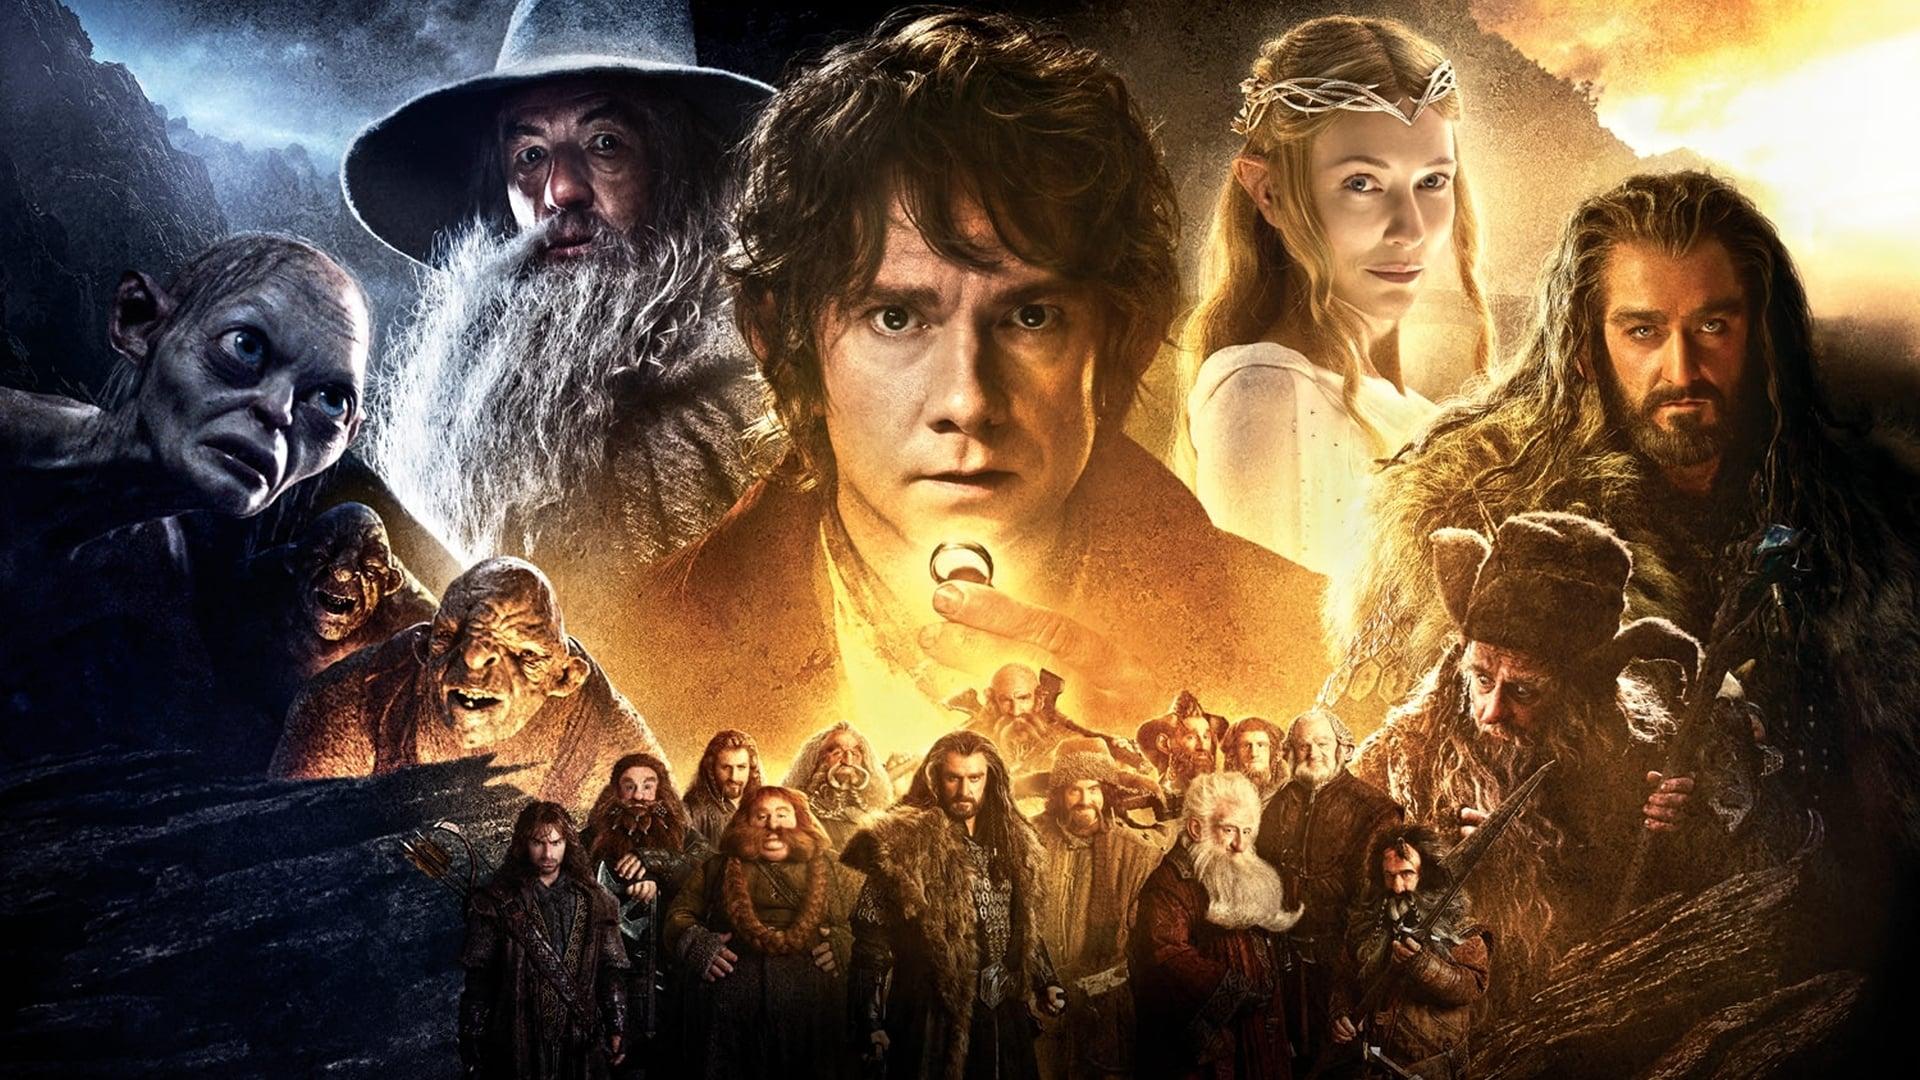 The Hobbit: An Unexpected Journey backdrop